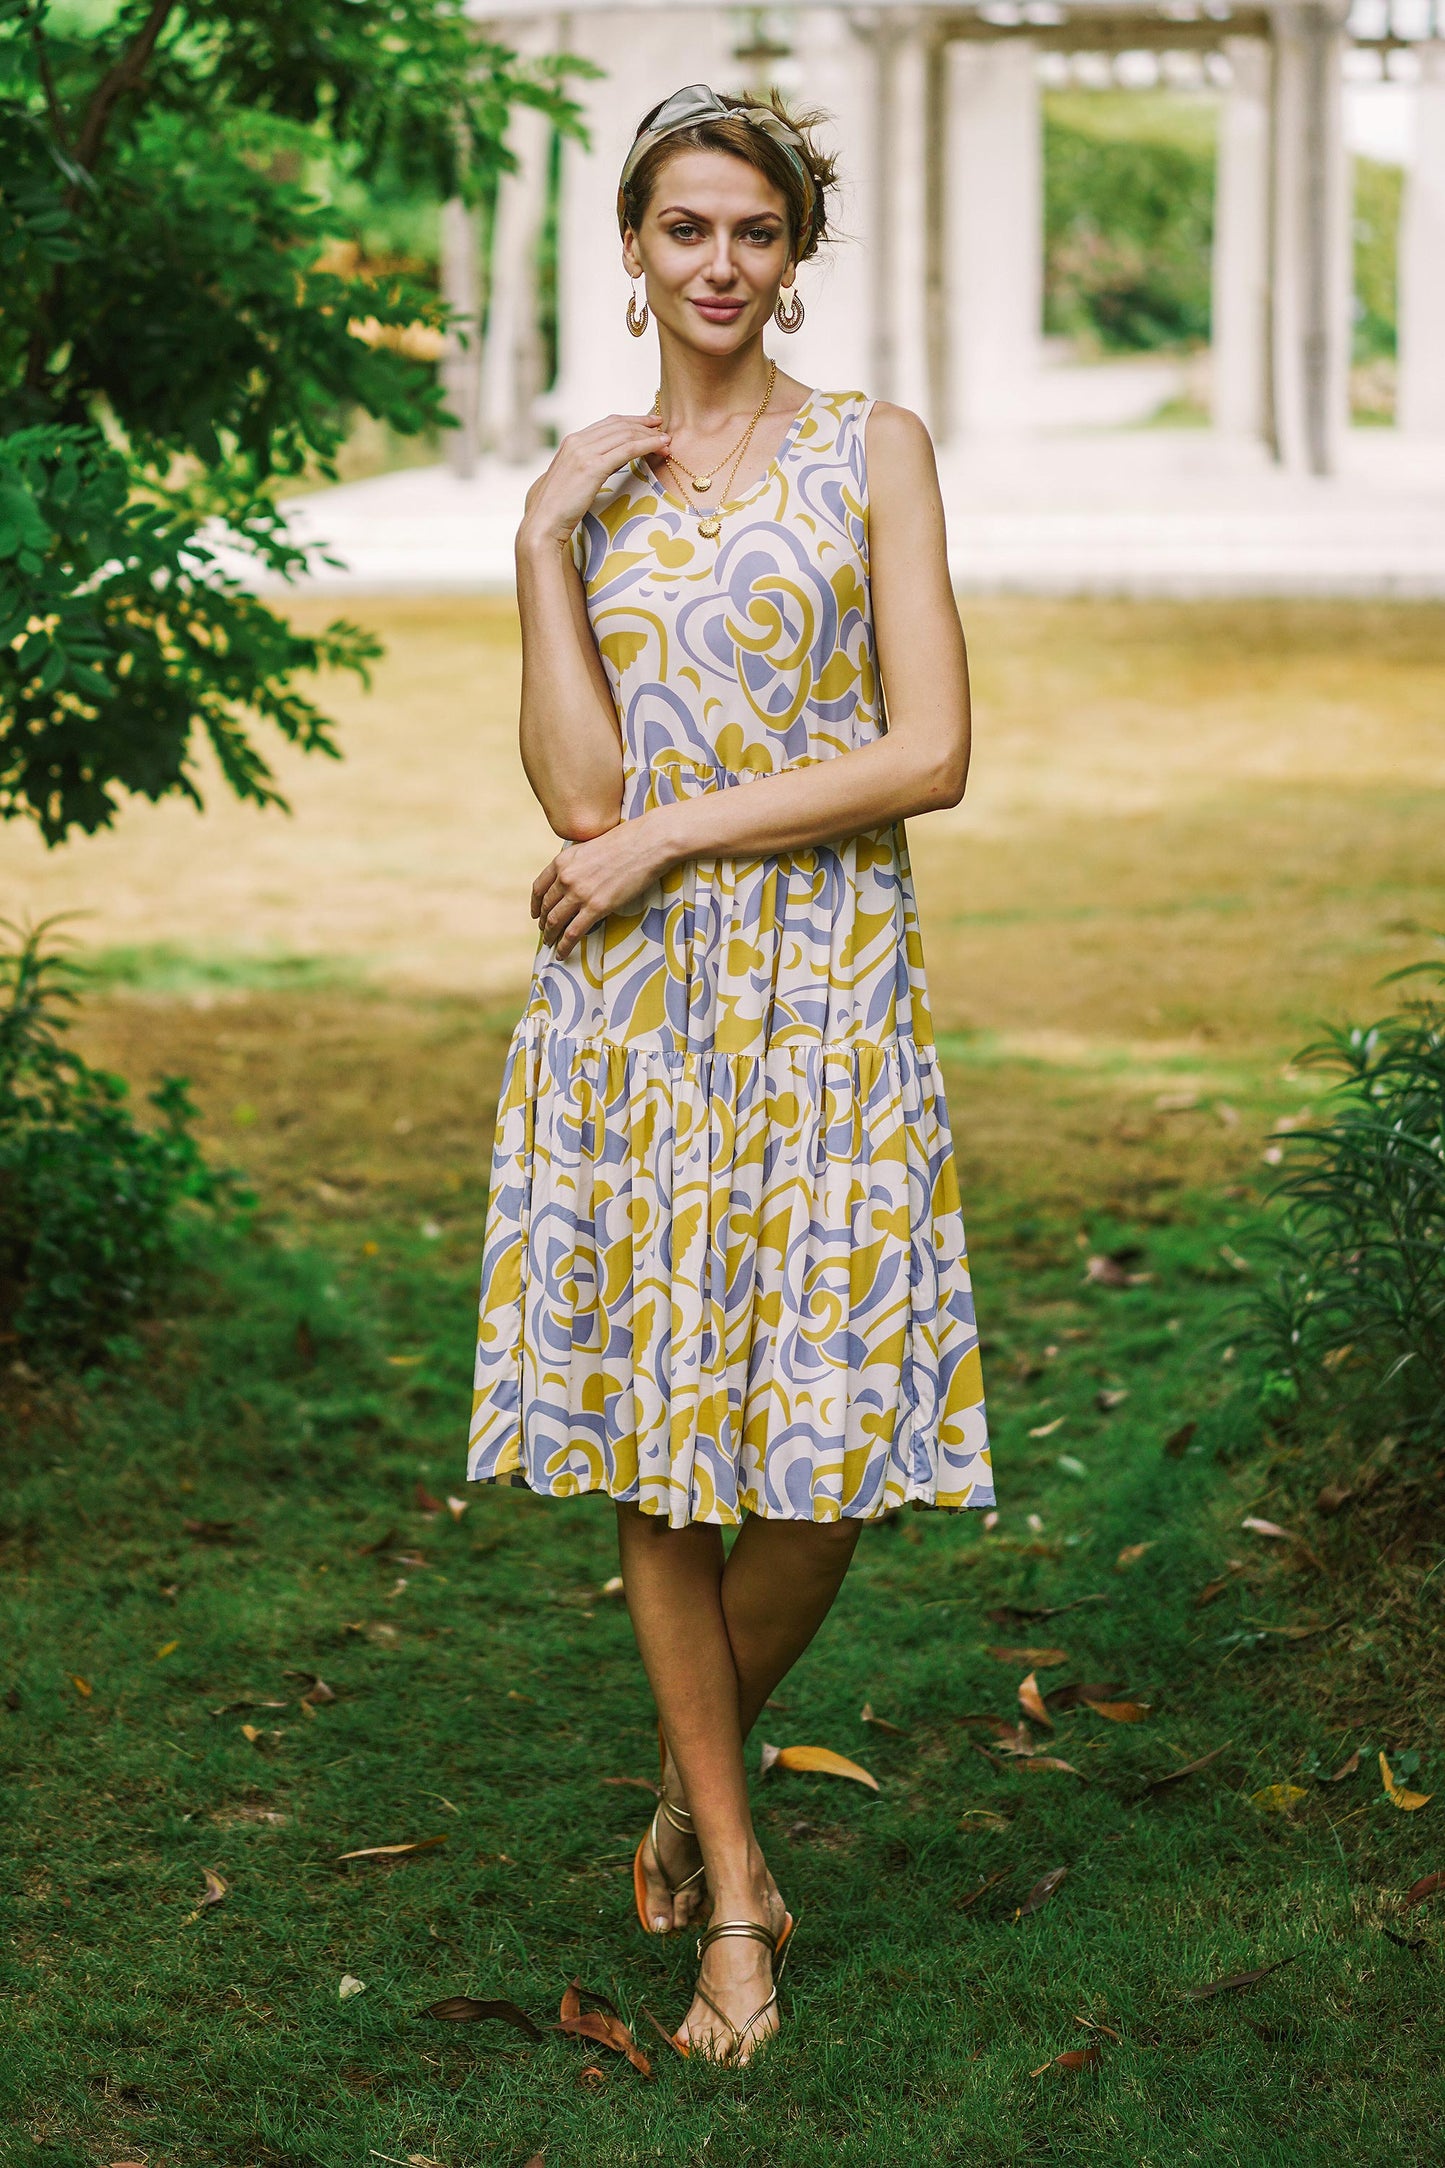 Spring Leaves Screen Printed Rayon Sundress from Bali